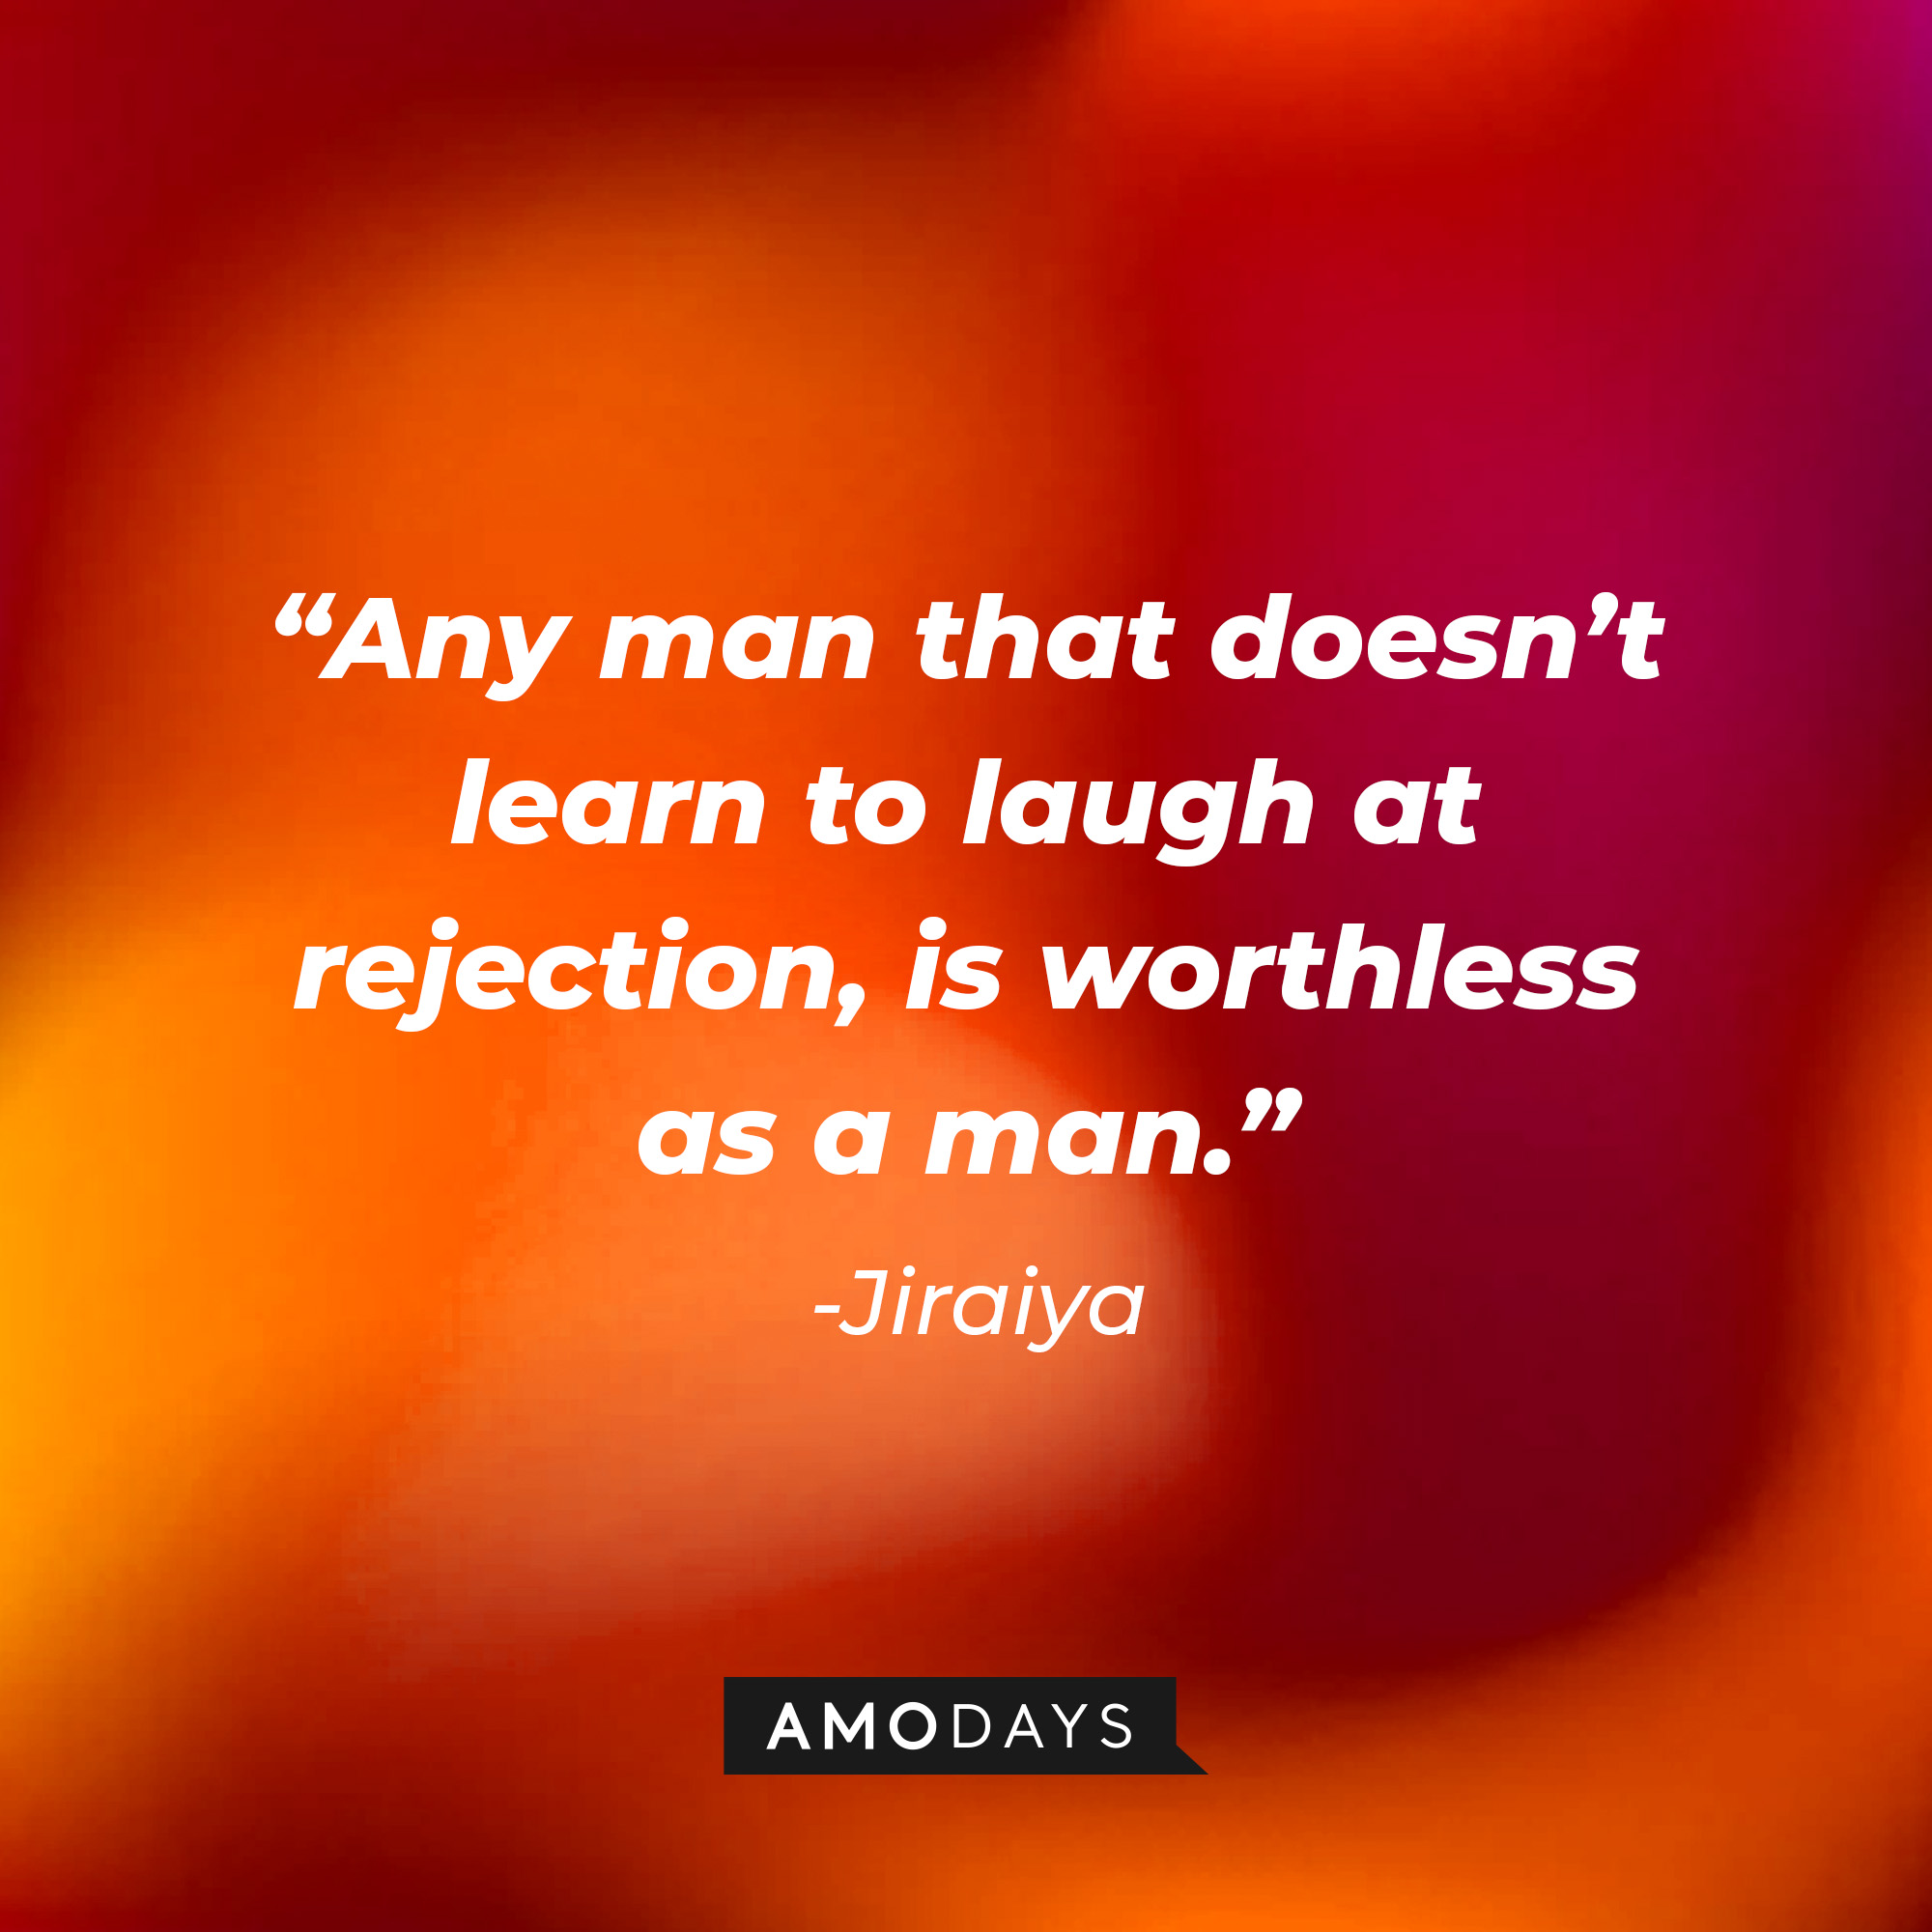 Jiraiya’s quote: “Any man that doesn’t learn to laugh at rejection, is worthless as a man.” │ Source: AmoDays